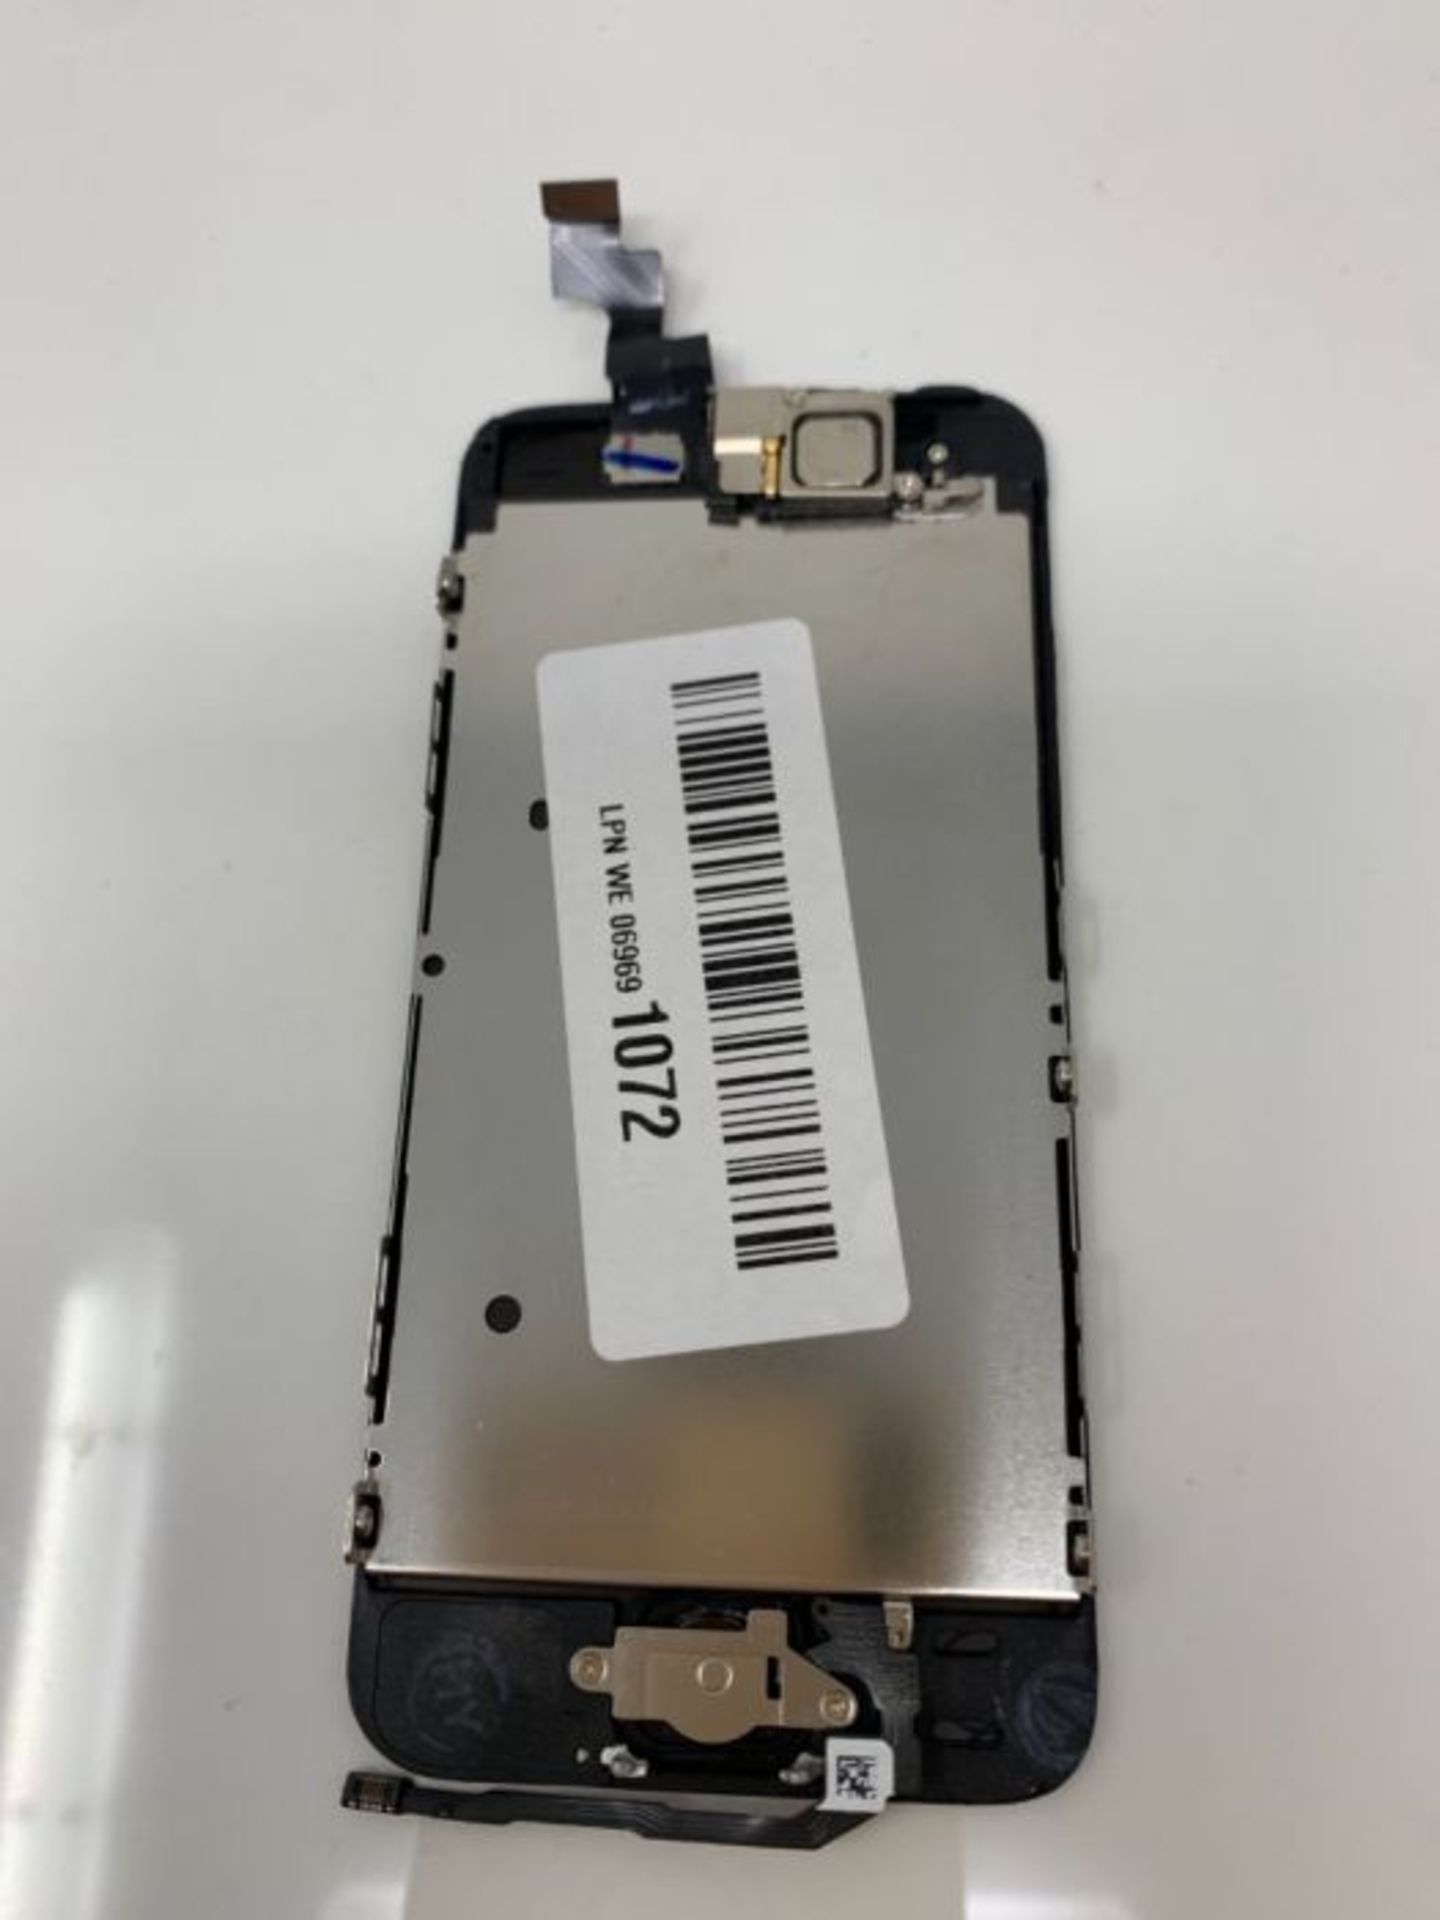 LL TRADER For iPhone 5s/SE LCD Screen Replacement Repair Touch Digitizer Frame Dispaly - Image 3 of 3